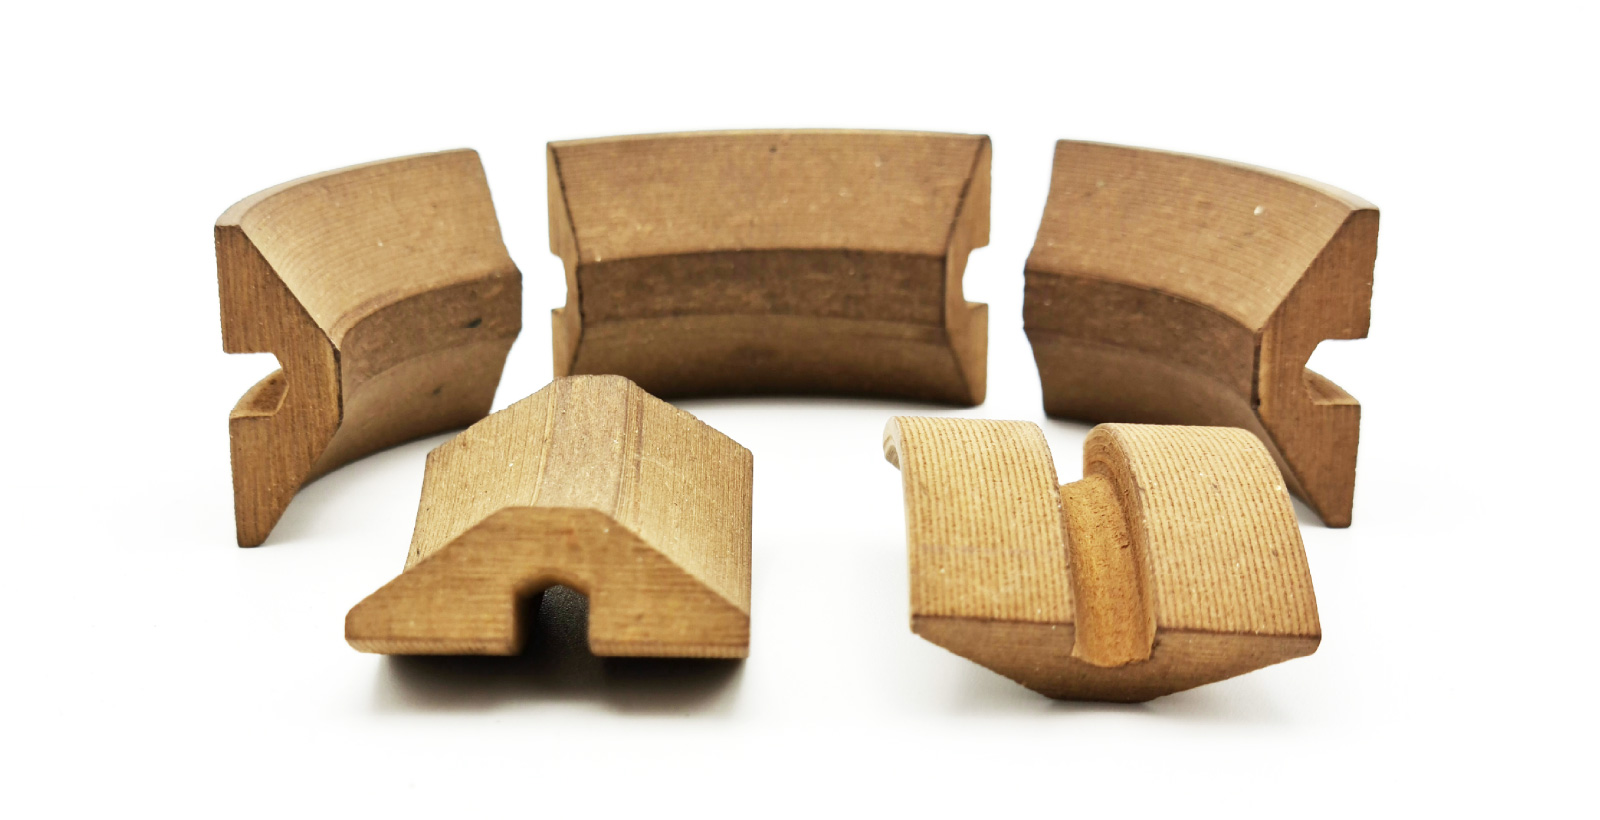 Customised Friction Blocks for Forestry and Timber Industry